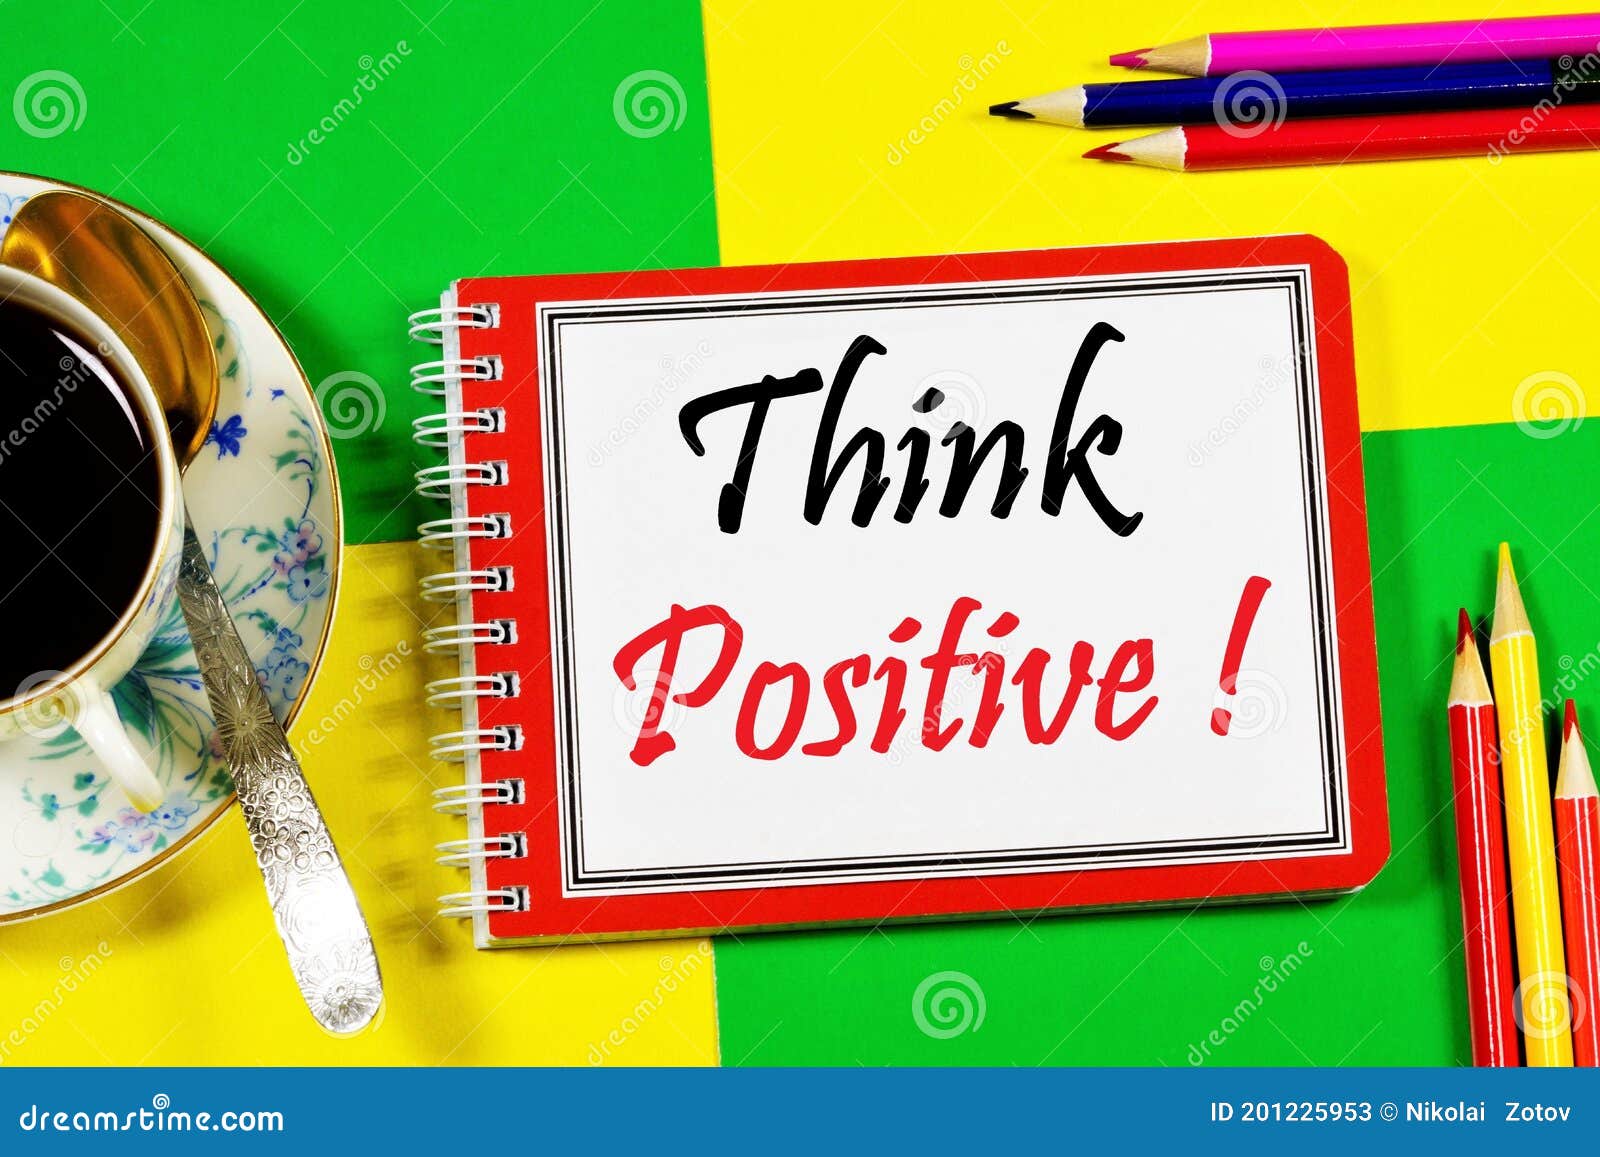 think positively. text label in the to-do planning notepad.